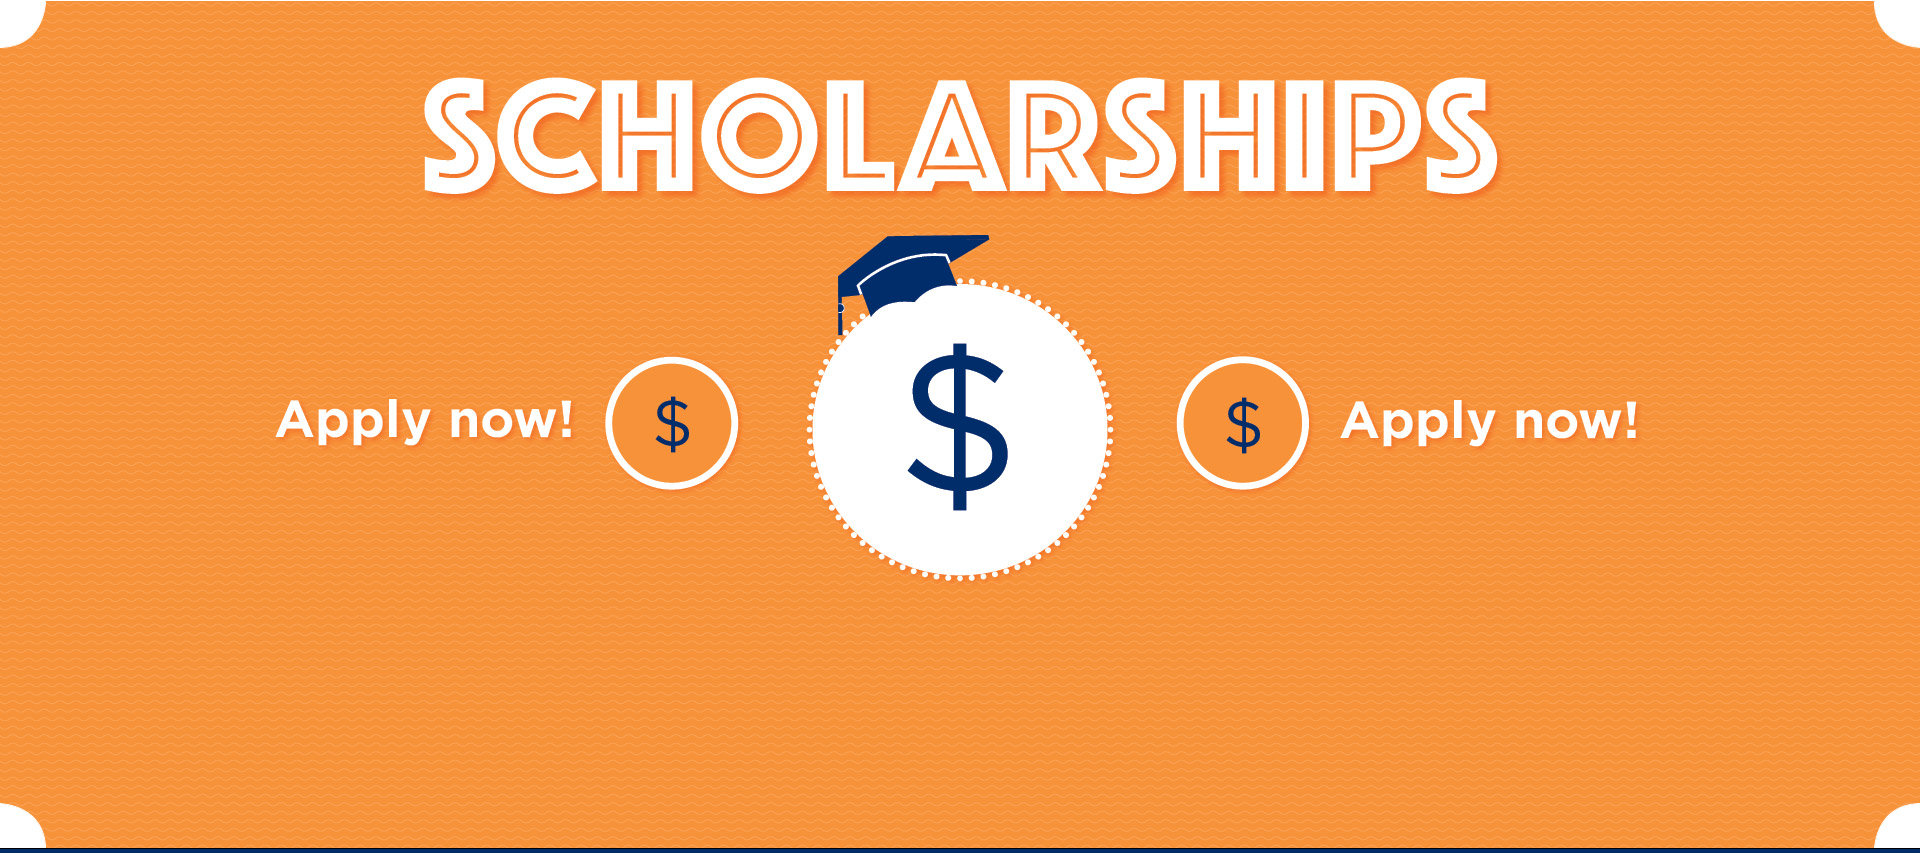 Text: Scholarships. Apply Now.